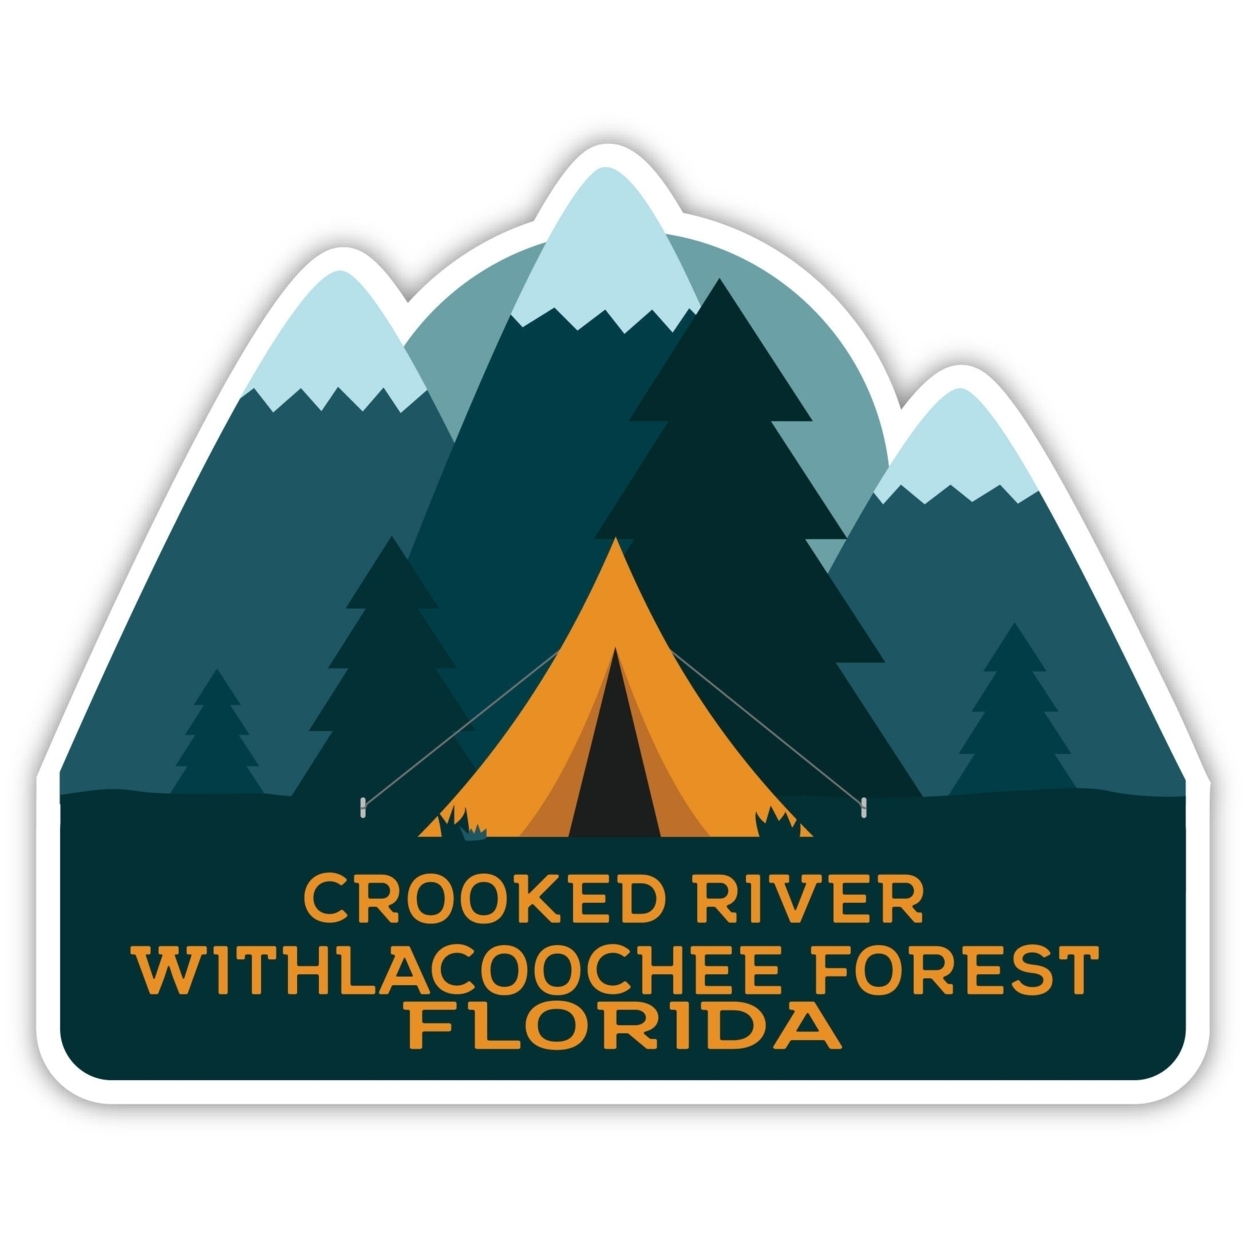 Crooked River Withlacoochee Forest Florida Souvenir Decorative Stickers (Choose Theme And Size) - Single Unit, 12-Inch, Tent